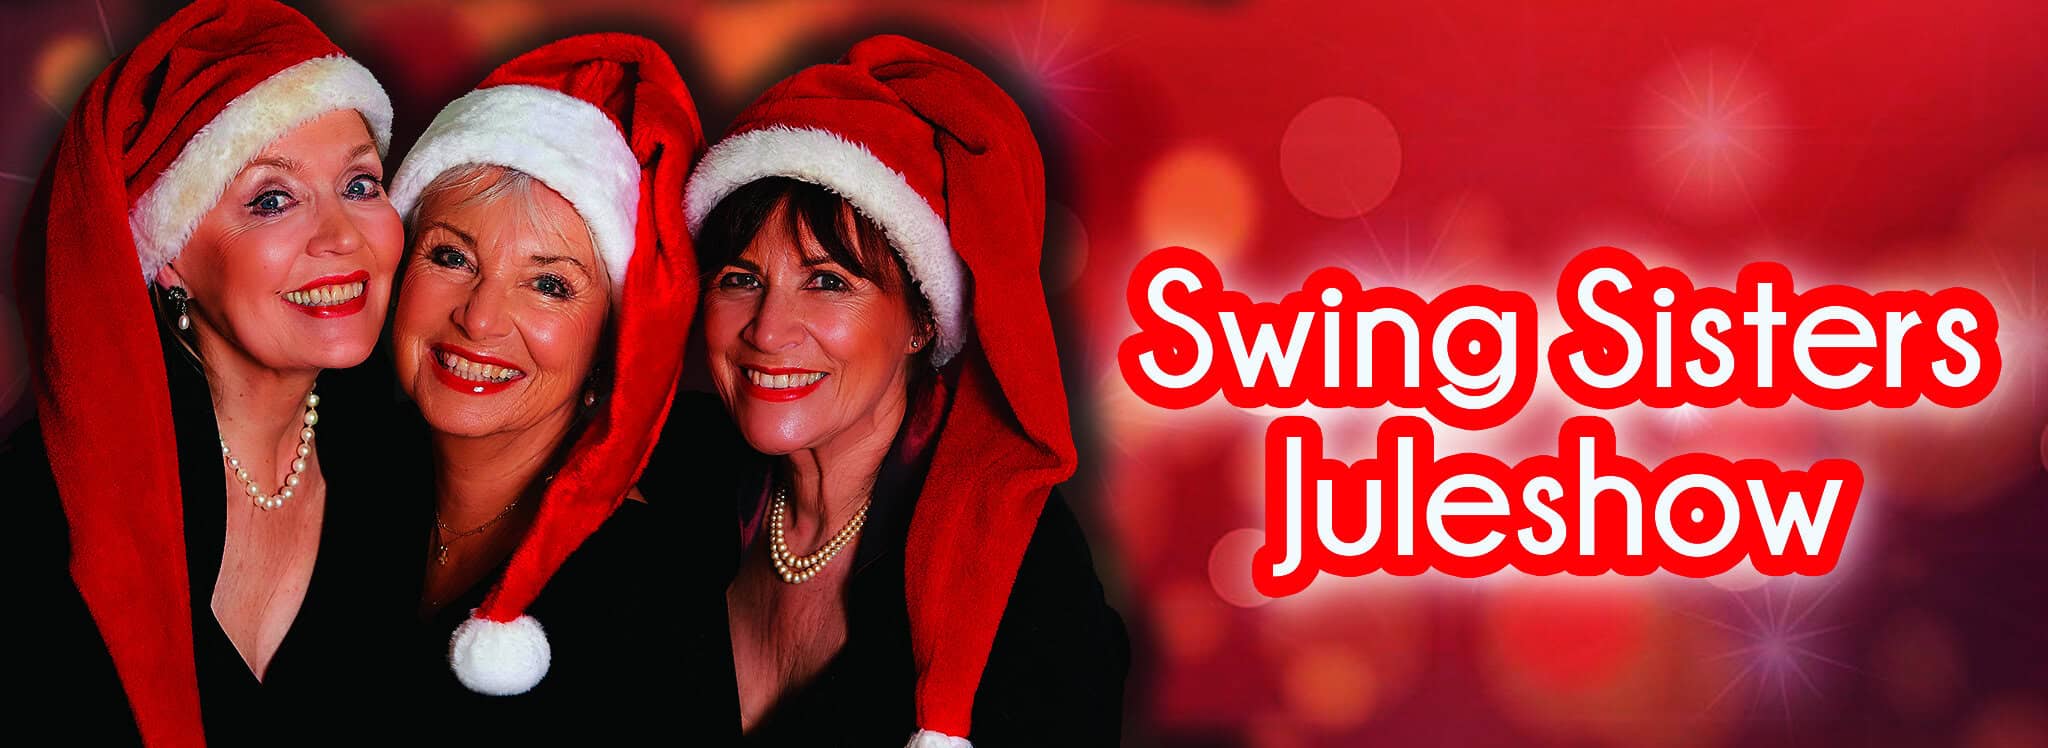 Swing Sisters Juleshow banner